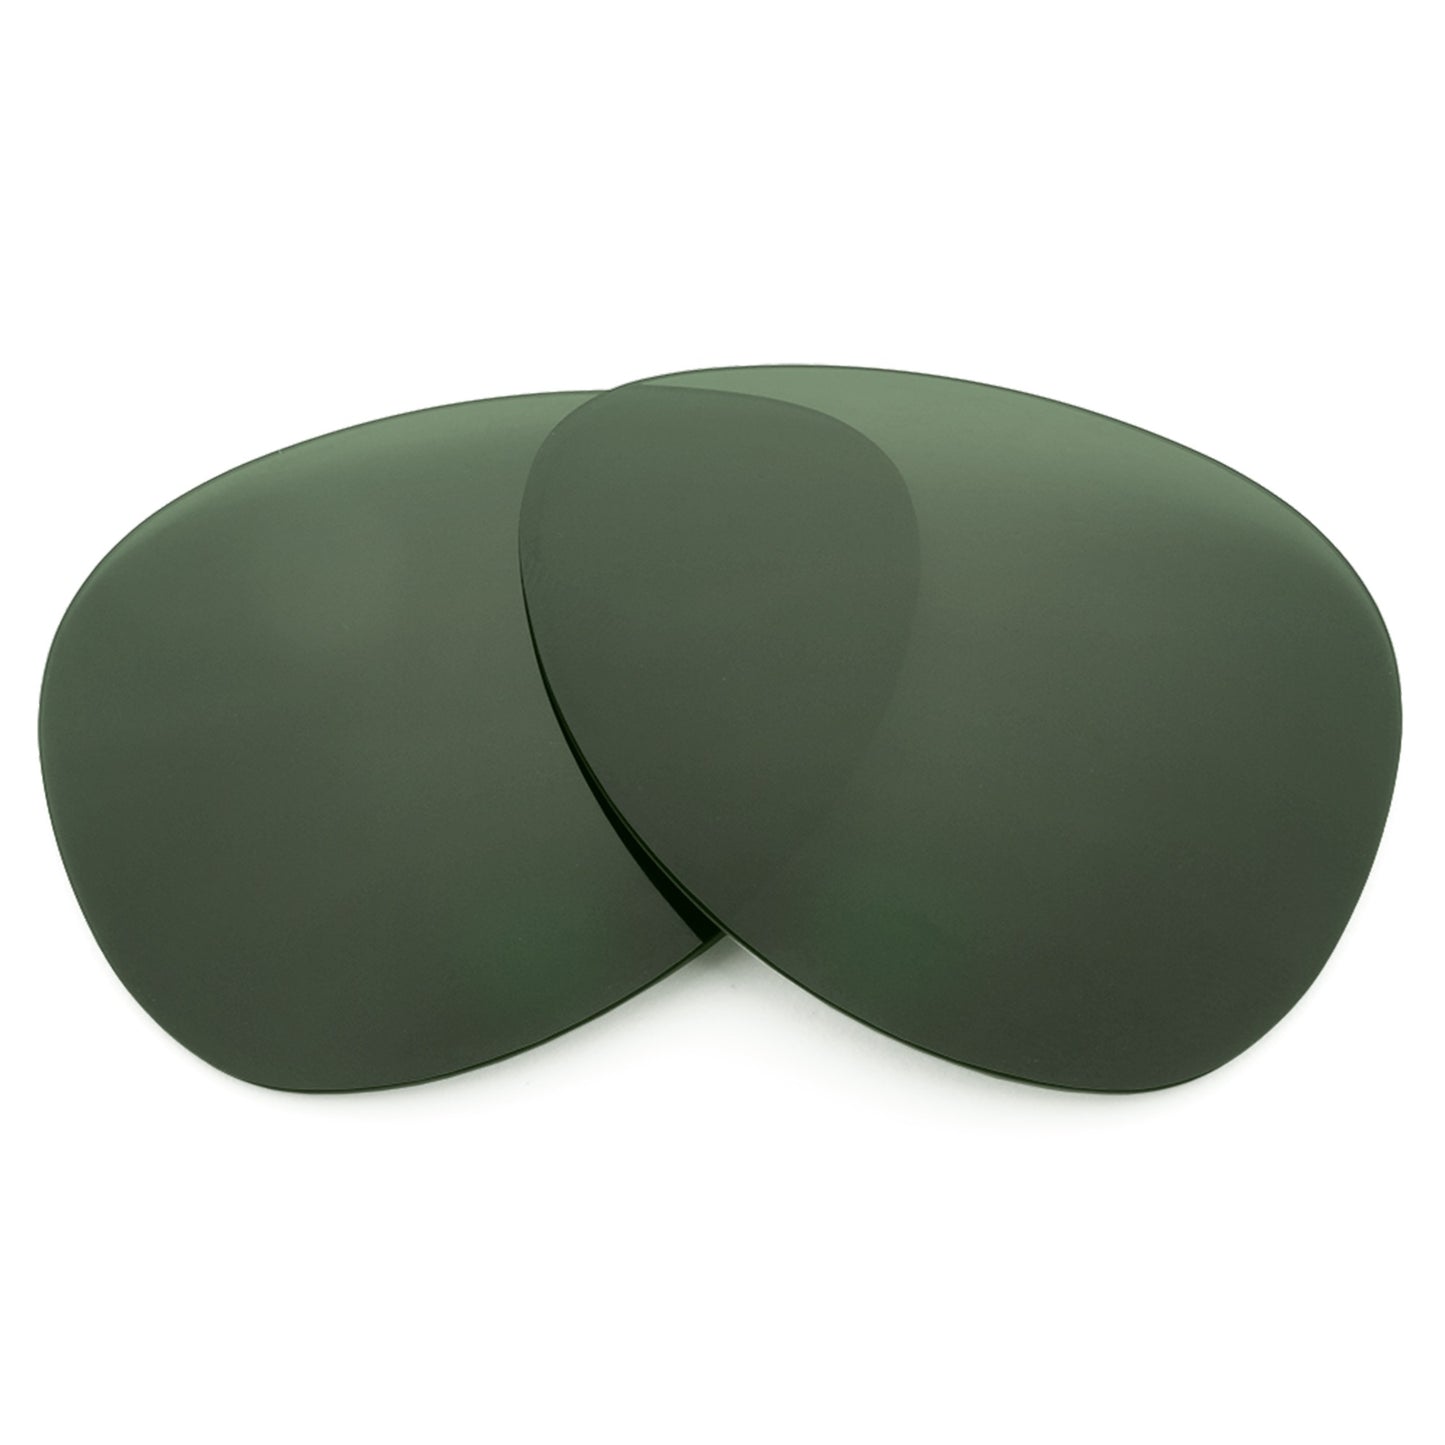 Revant replacement lenses for Ray-Ban Jackie Ohh RB4101 58mm Polarized Gray Green